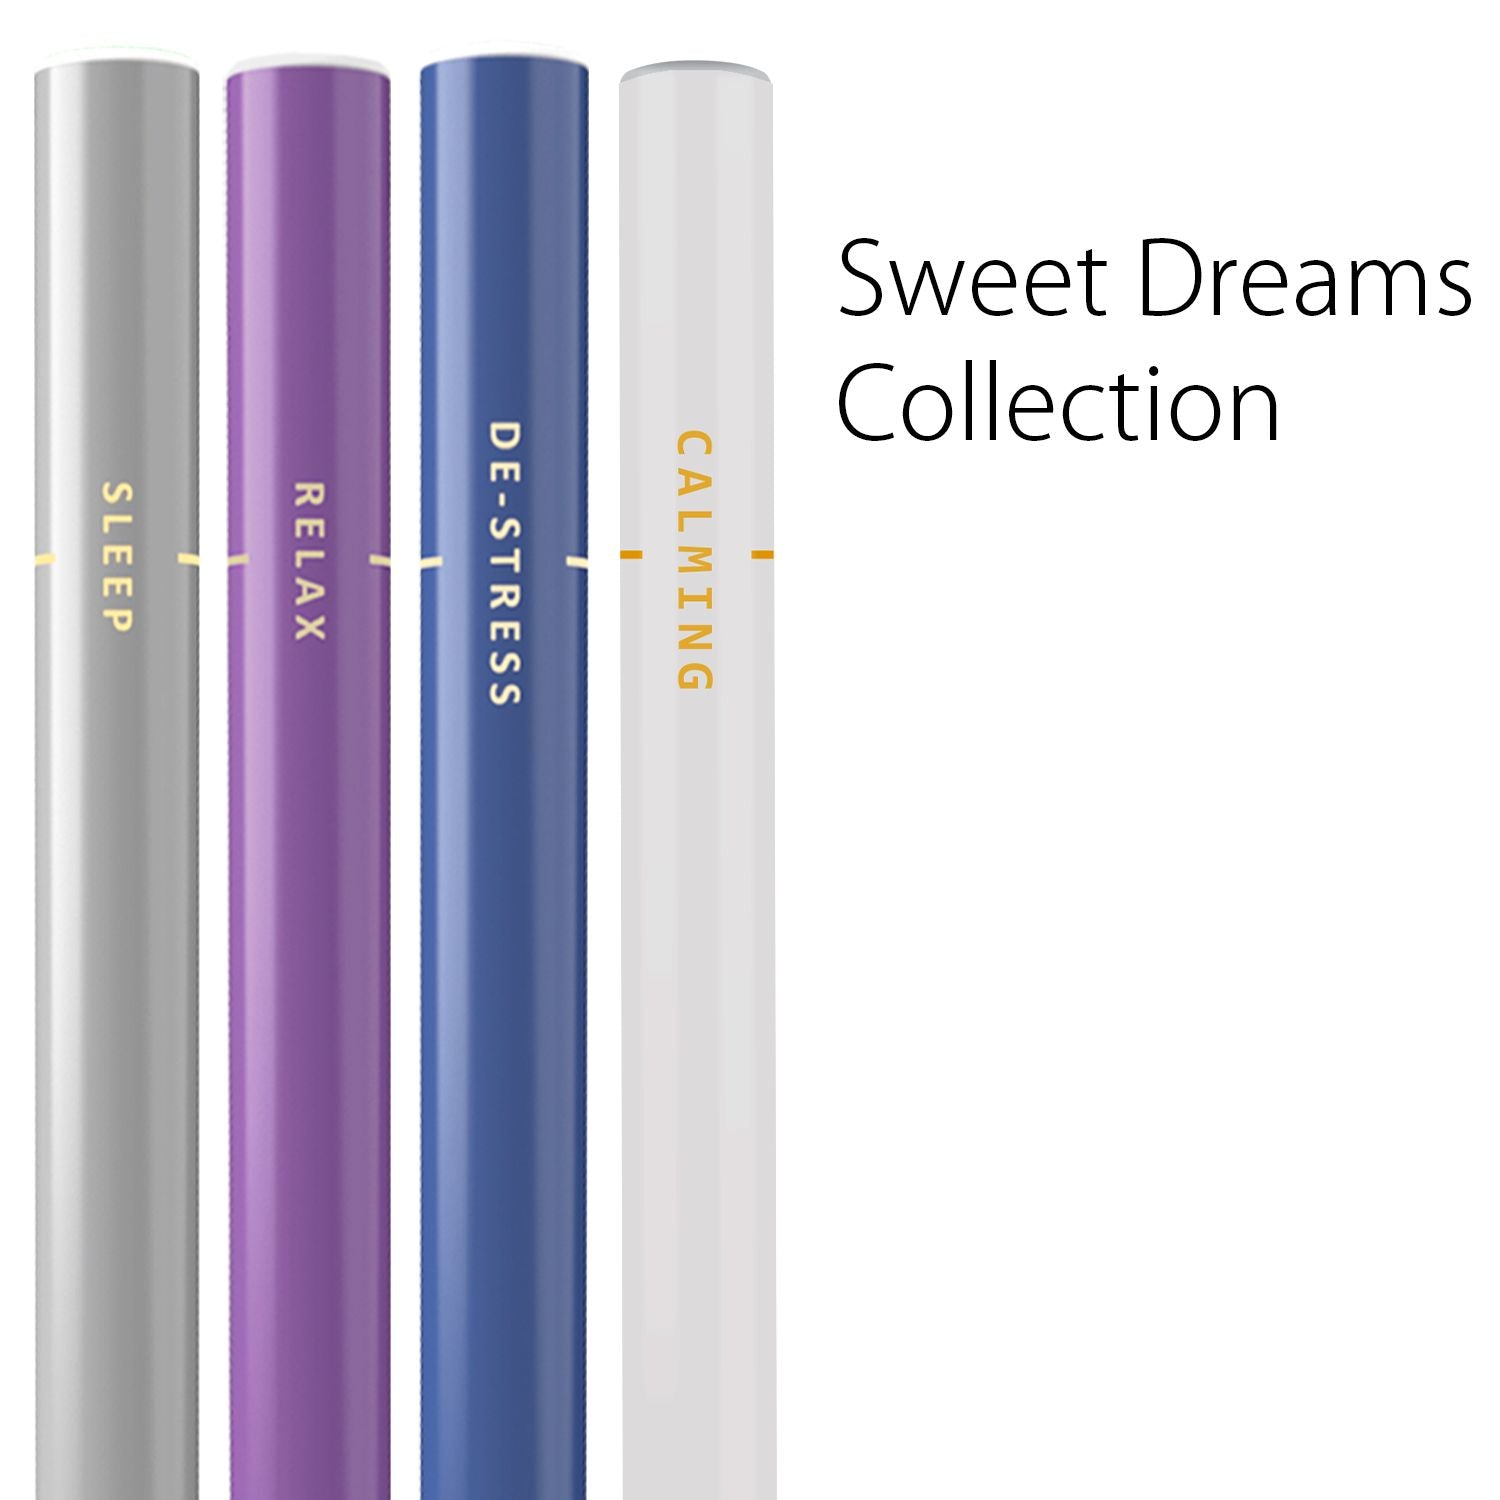 Sweet Dreams Collection